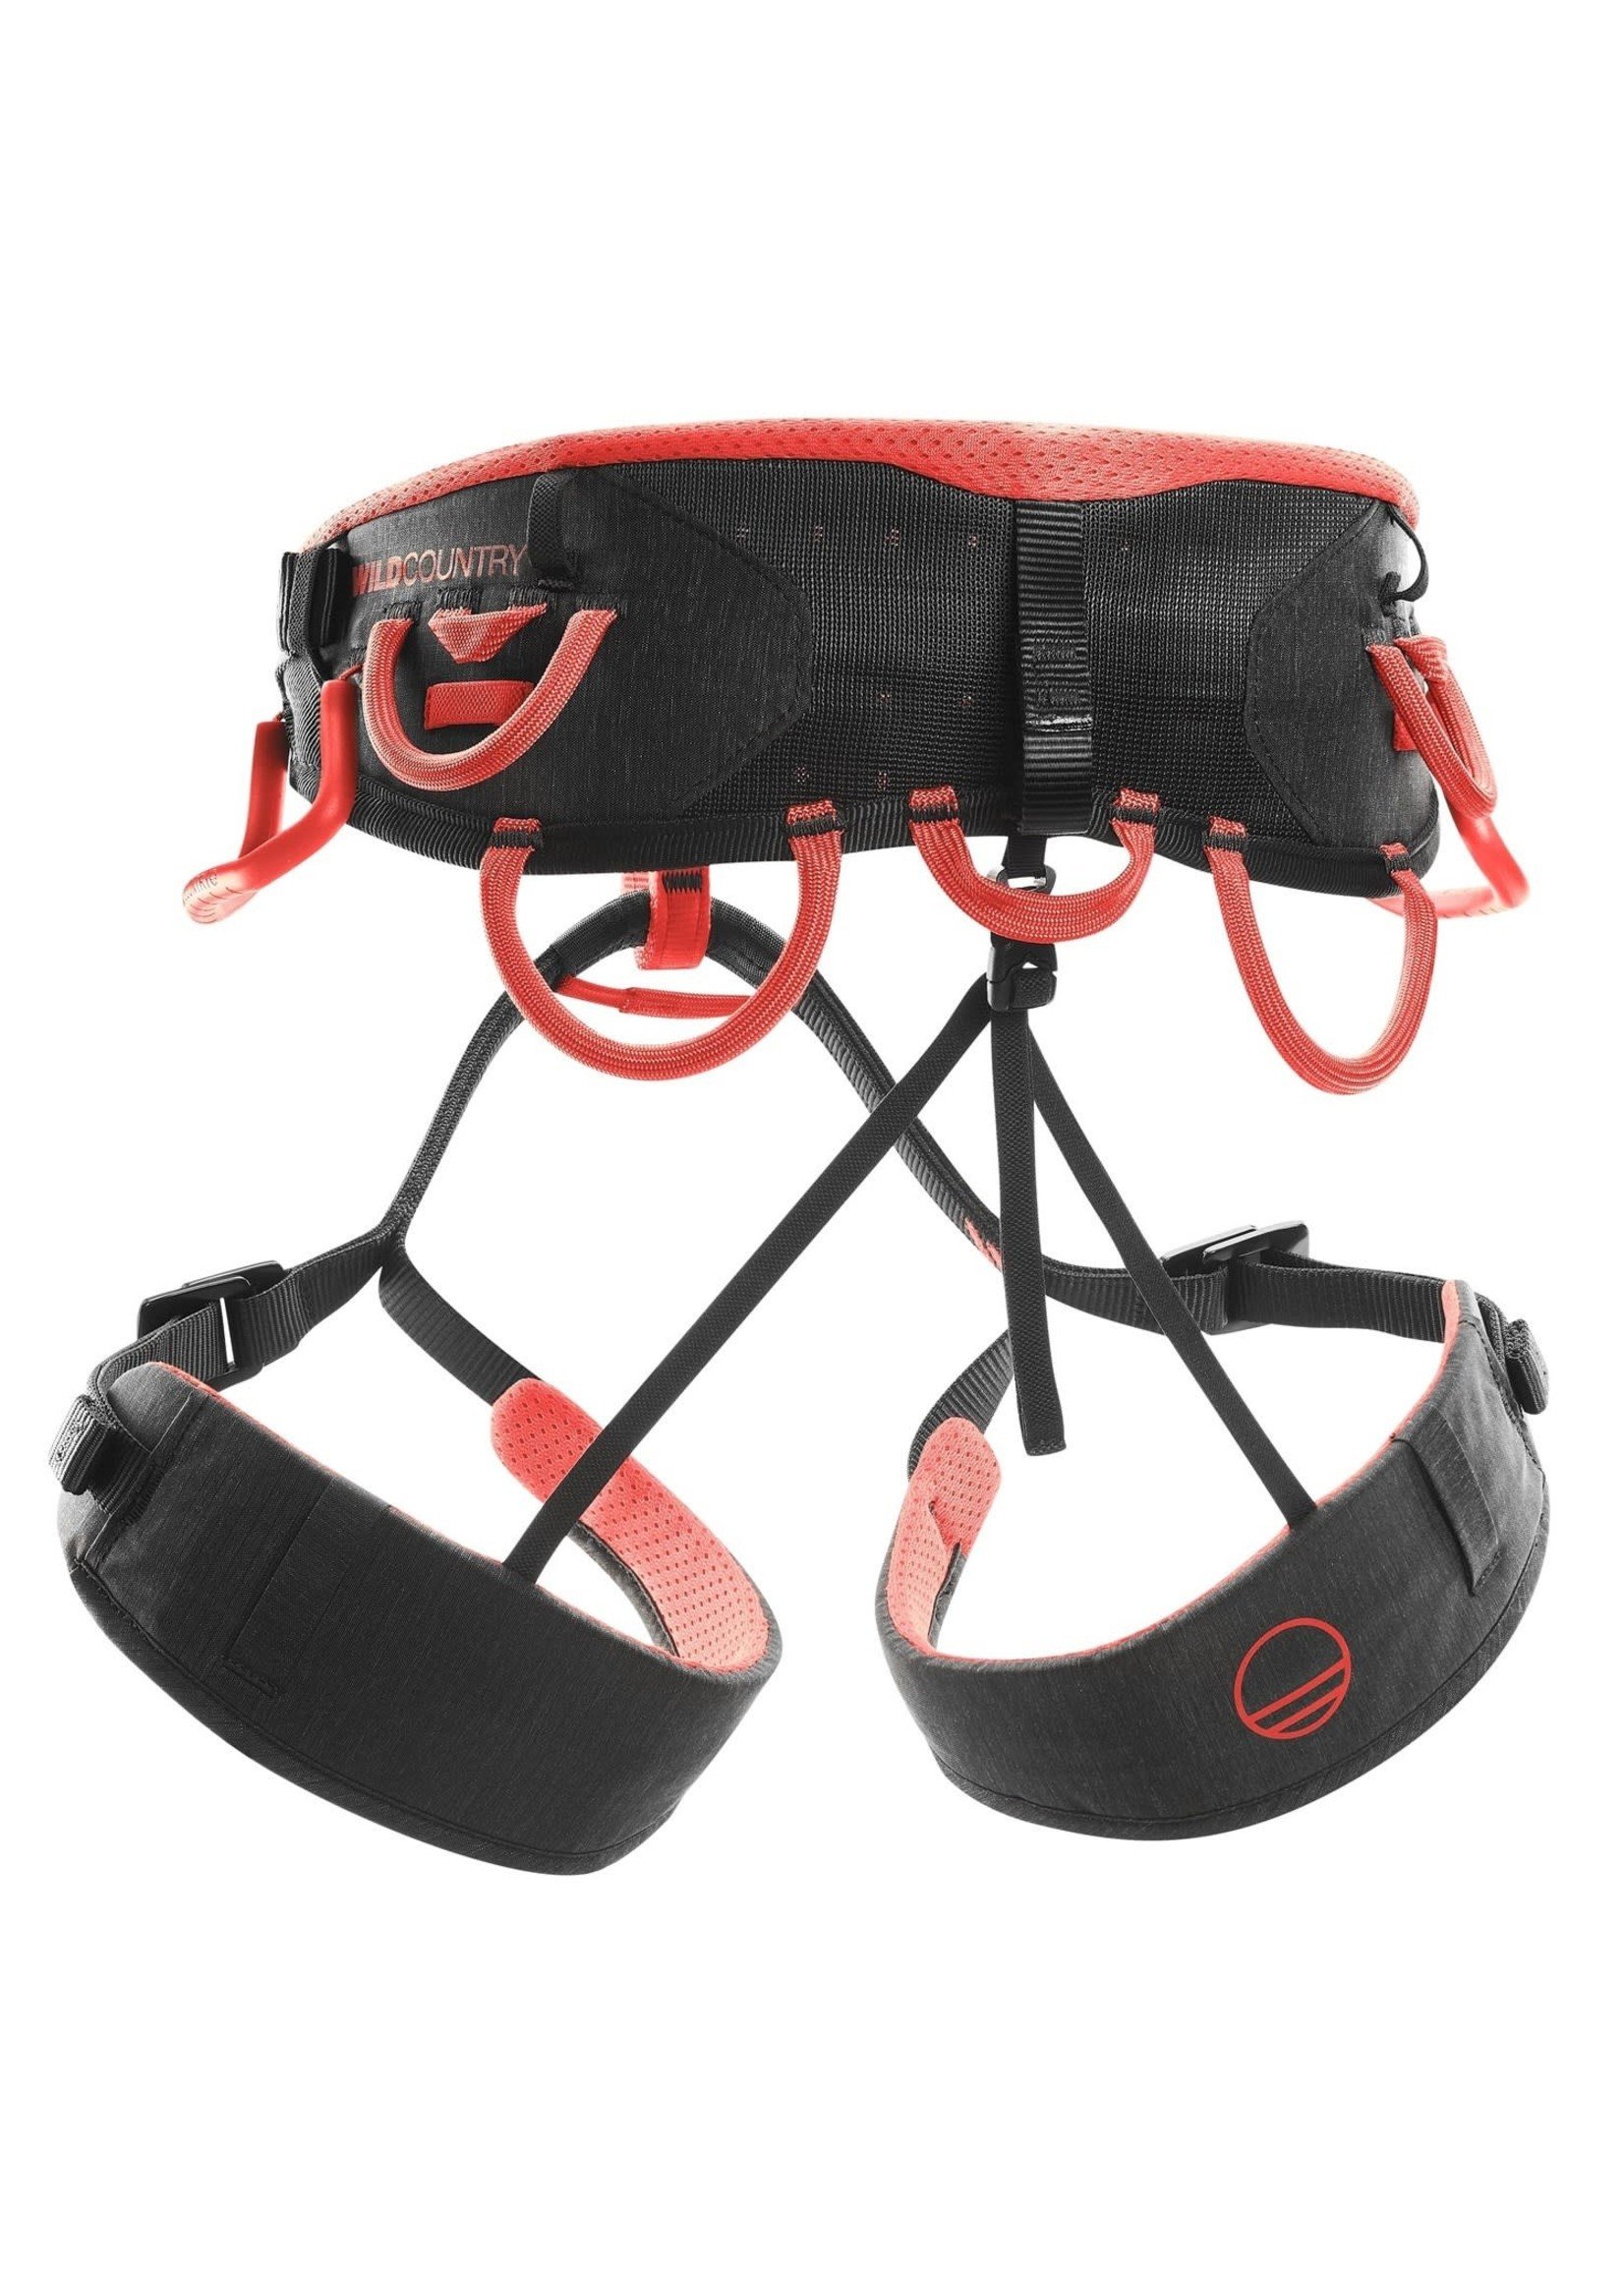 Wild Country Syncro Harness - Unisex